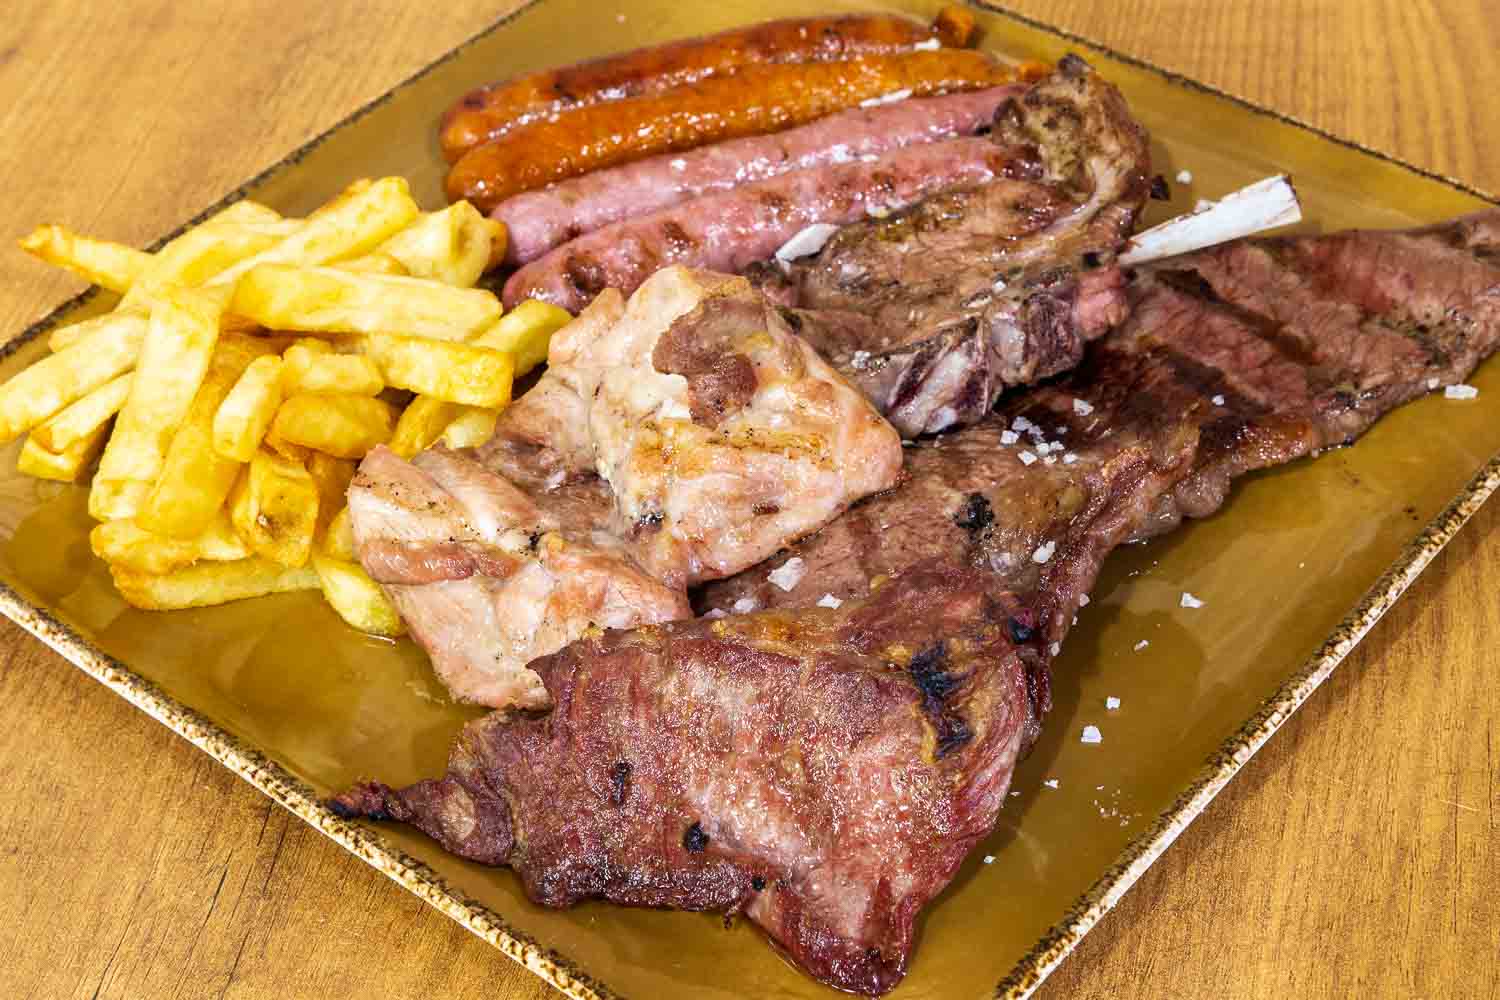 Mixed grill (2 people)